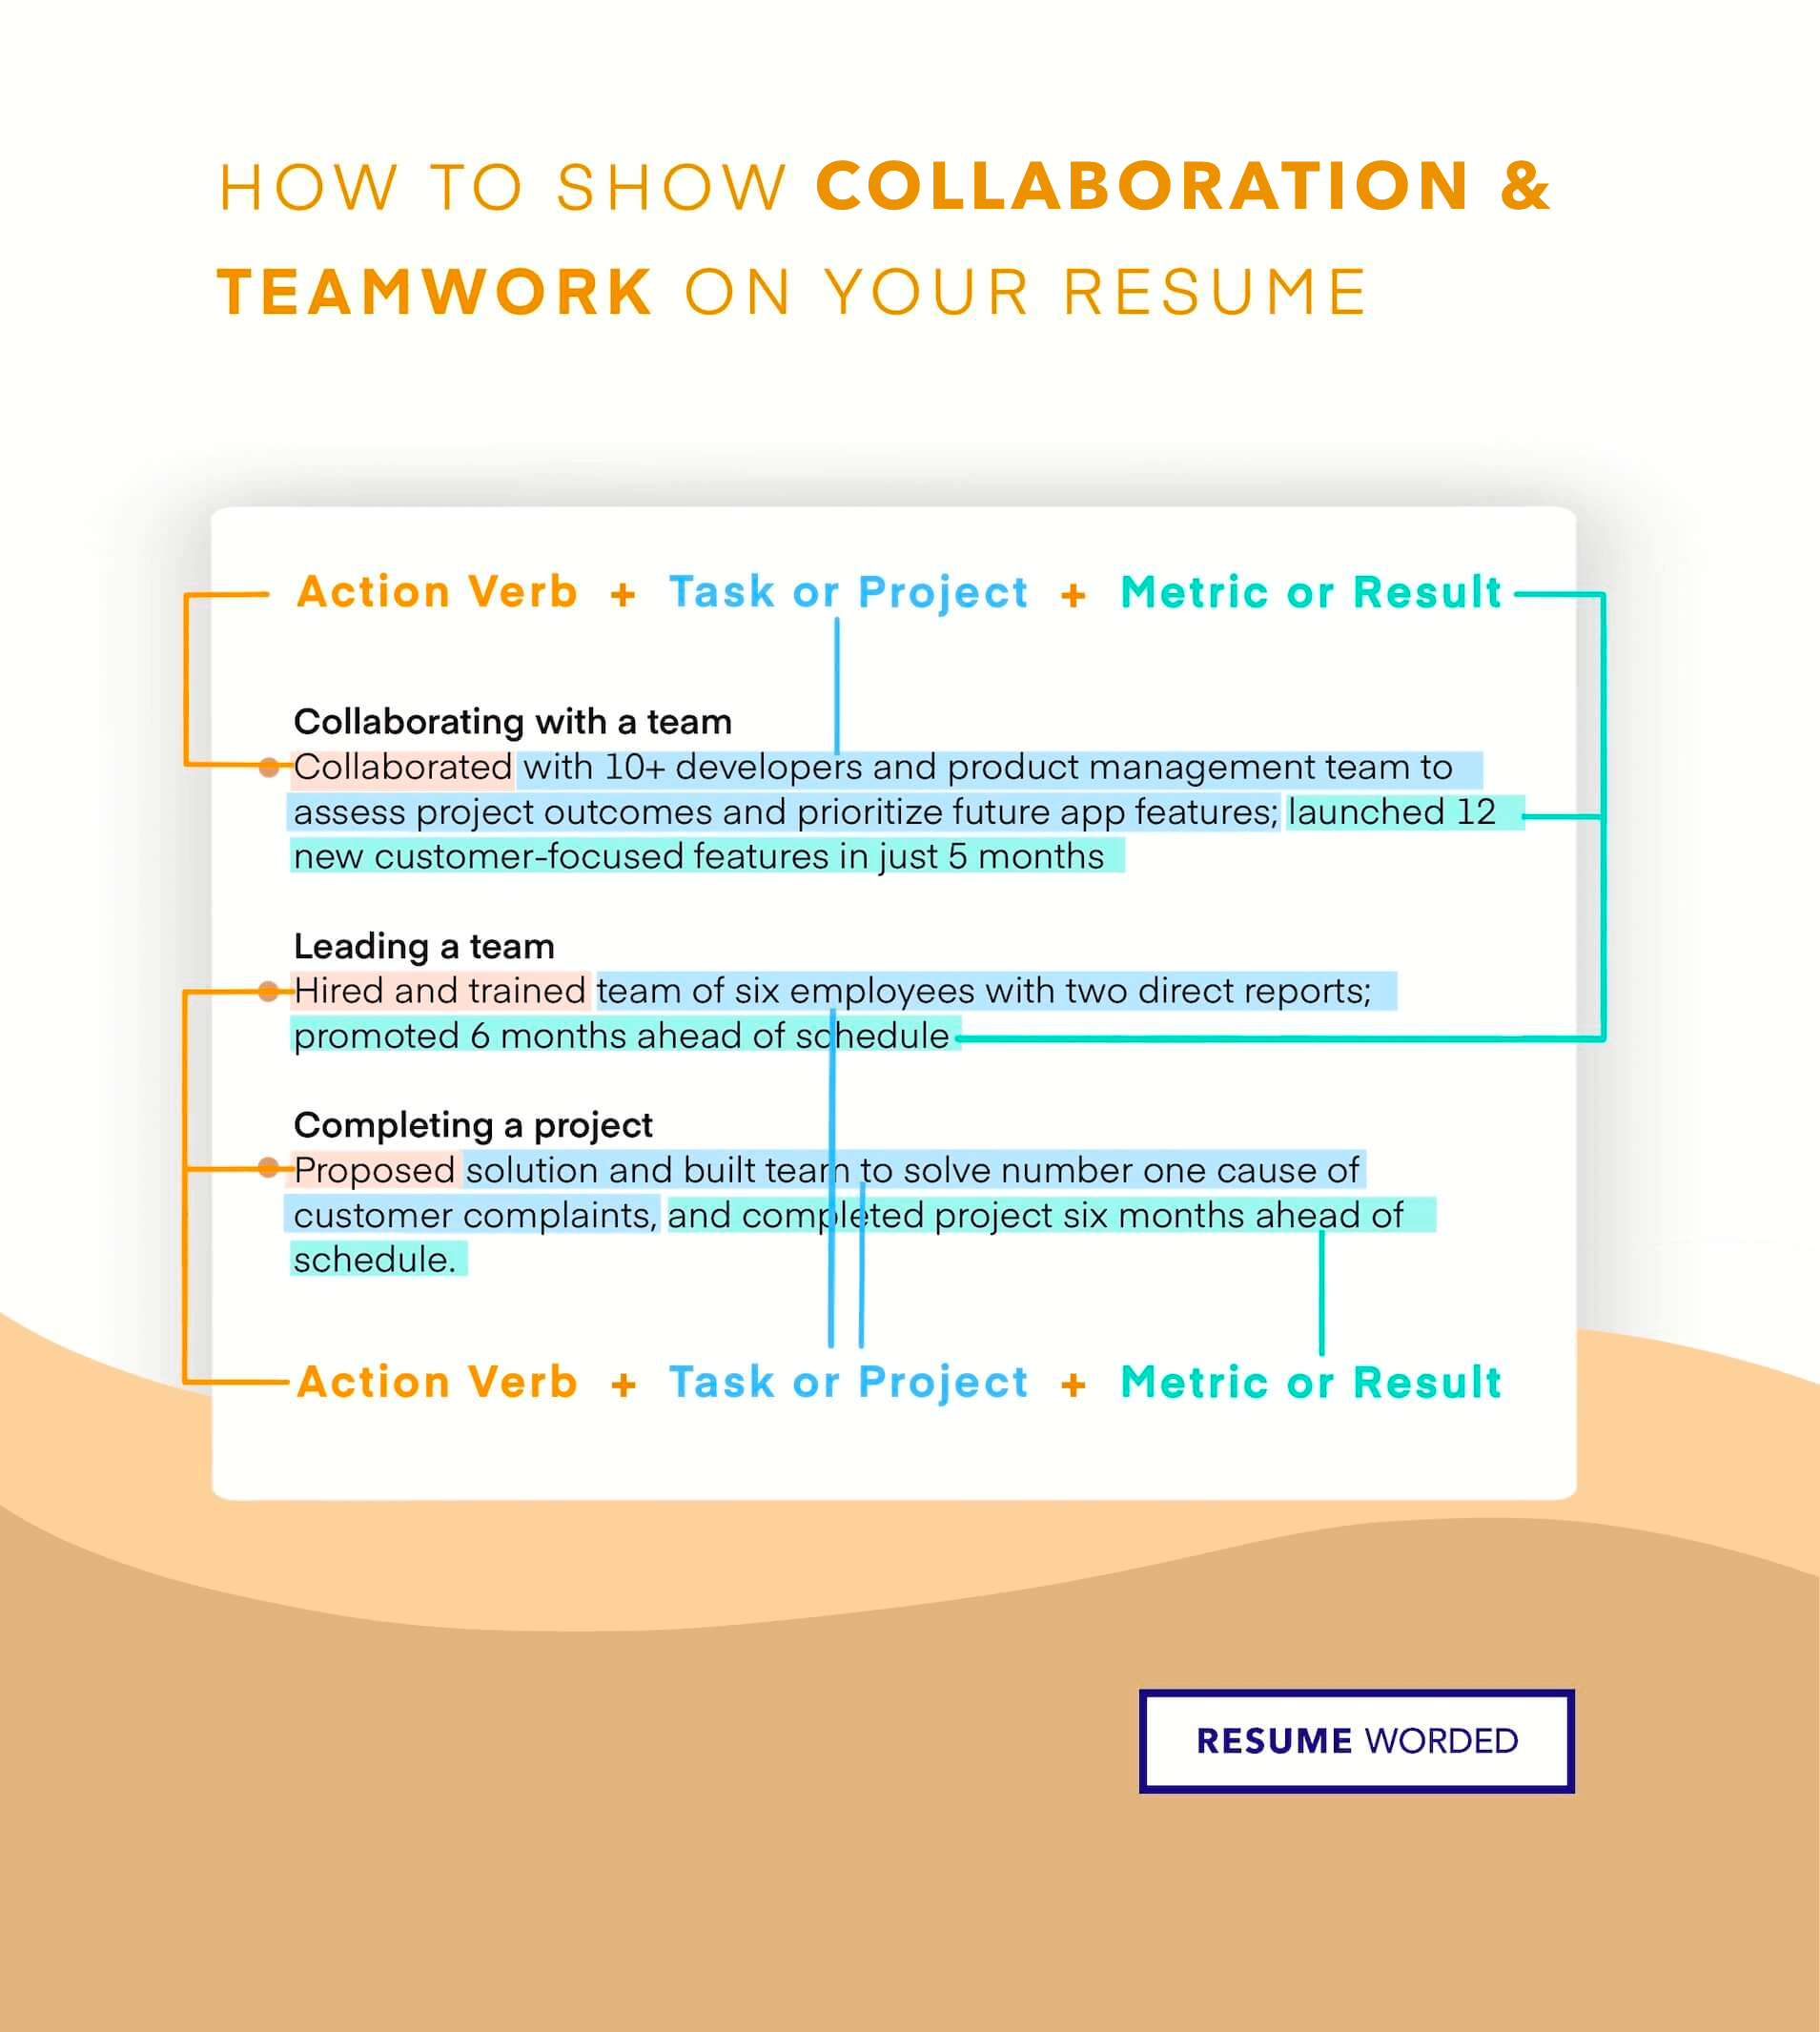 3 examples of demonstrating your collaboration skills on your resume